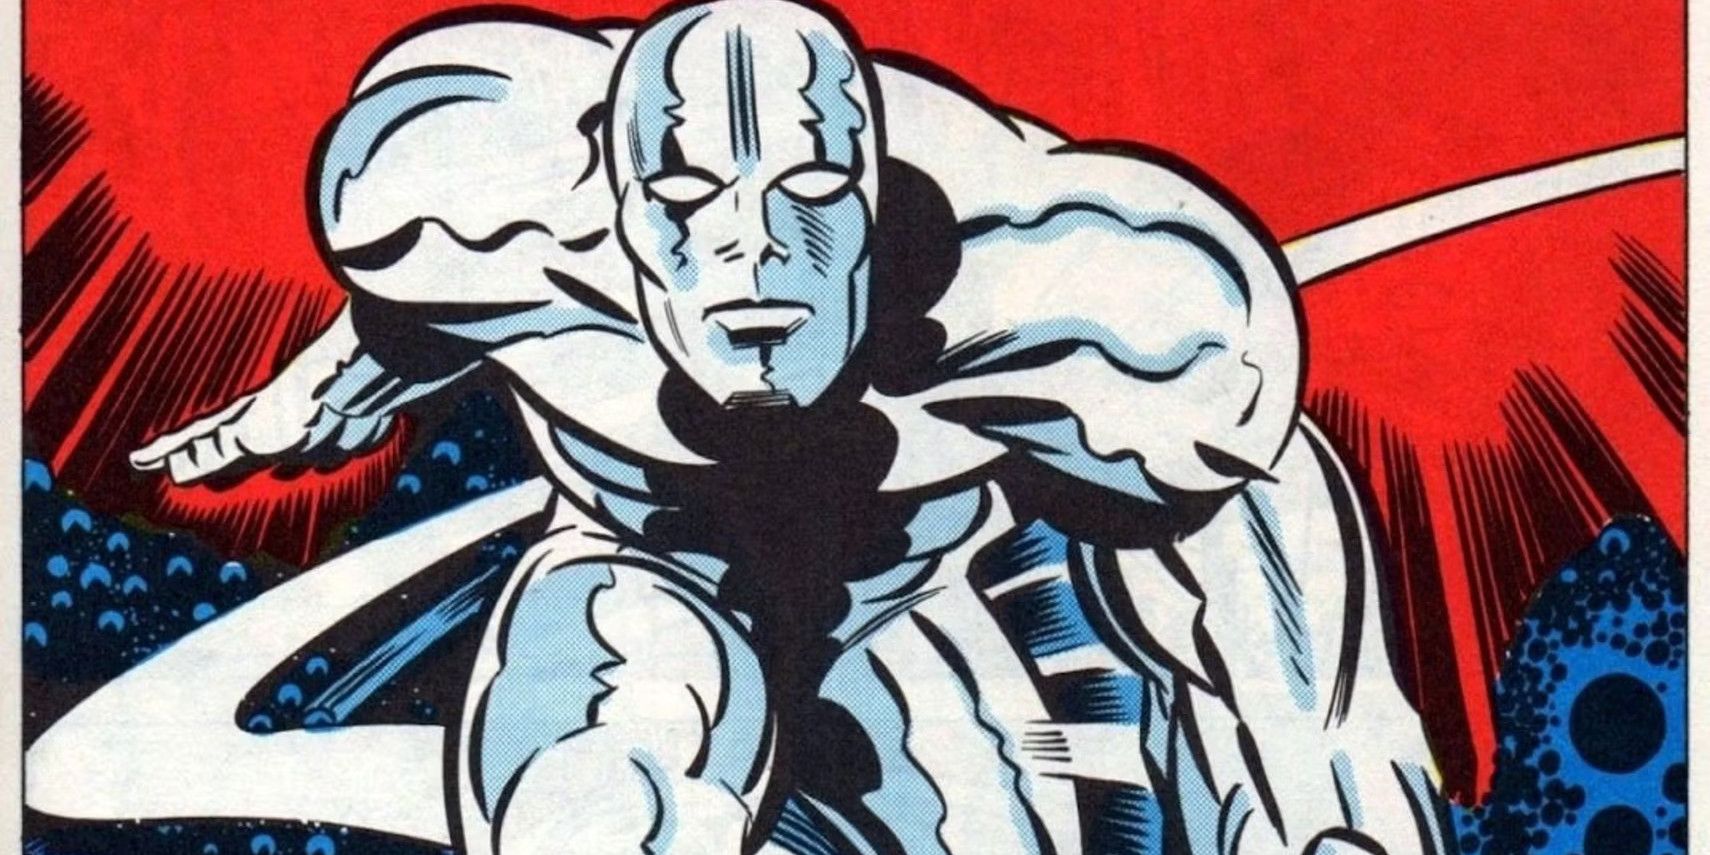 The Silver Surfer flying through the cosmos in Marvel Comics